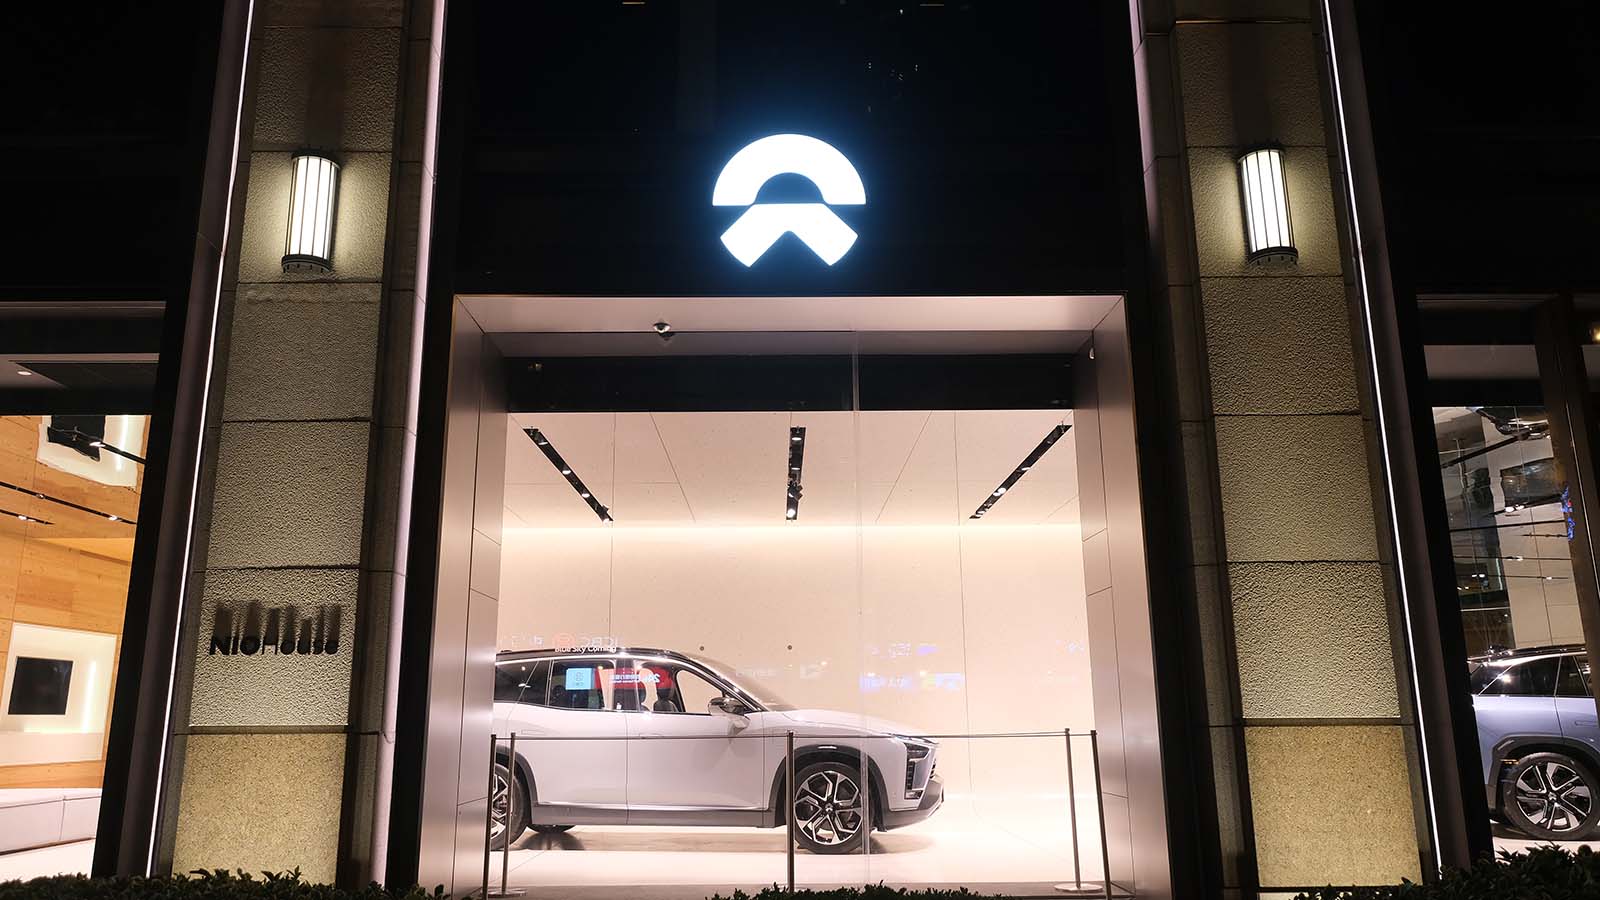 NIO stock: A shot from the outside of a Nio display room at night.